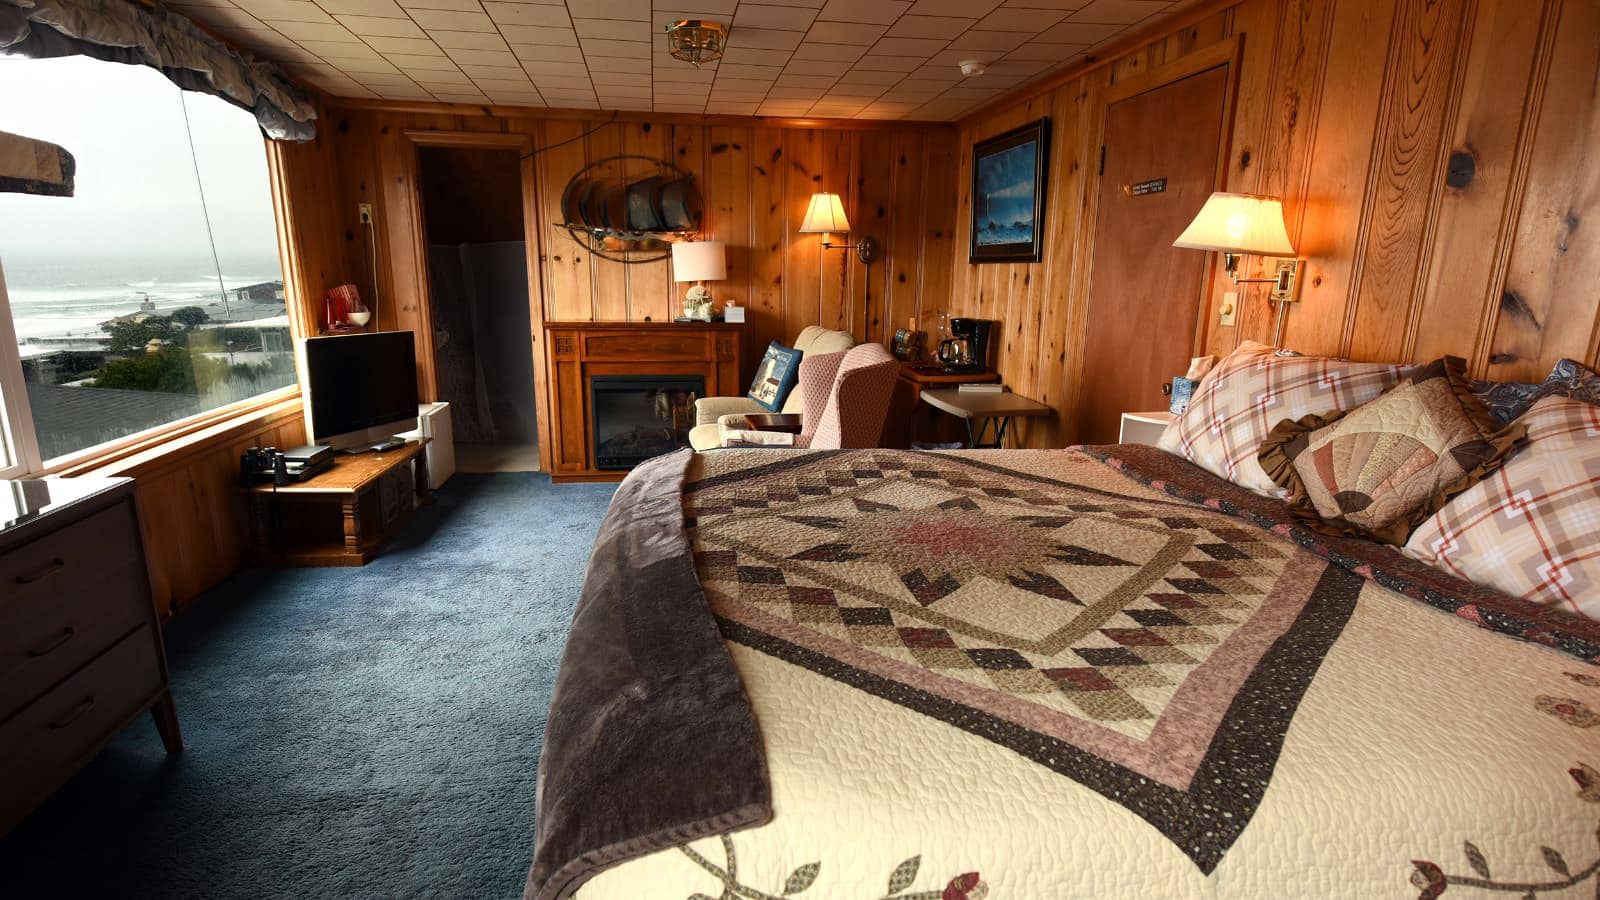 Bedroom with wood paneled walls, carpeting, multicolored bedding, fireplace, and large window with view of the water